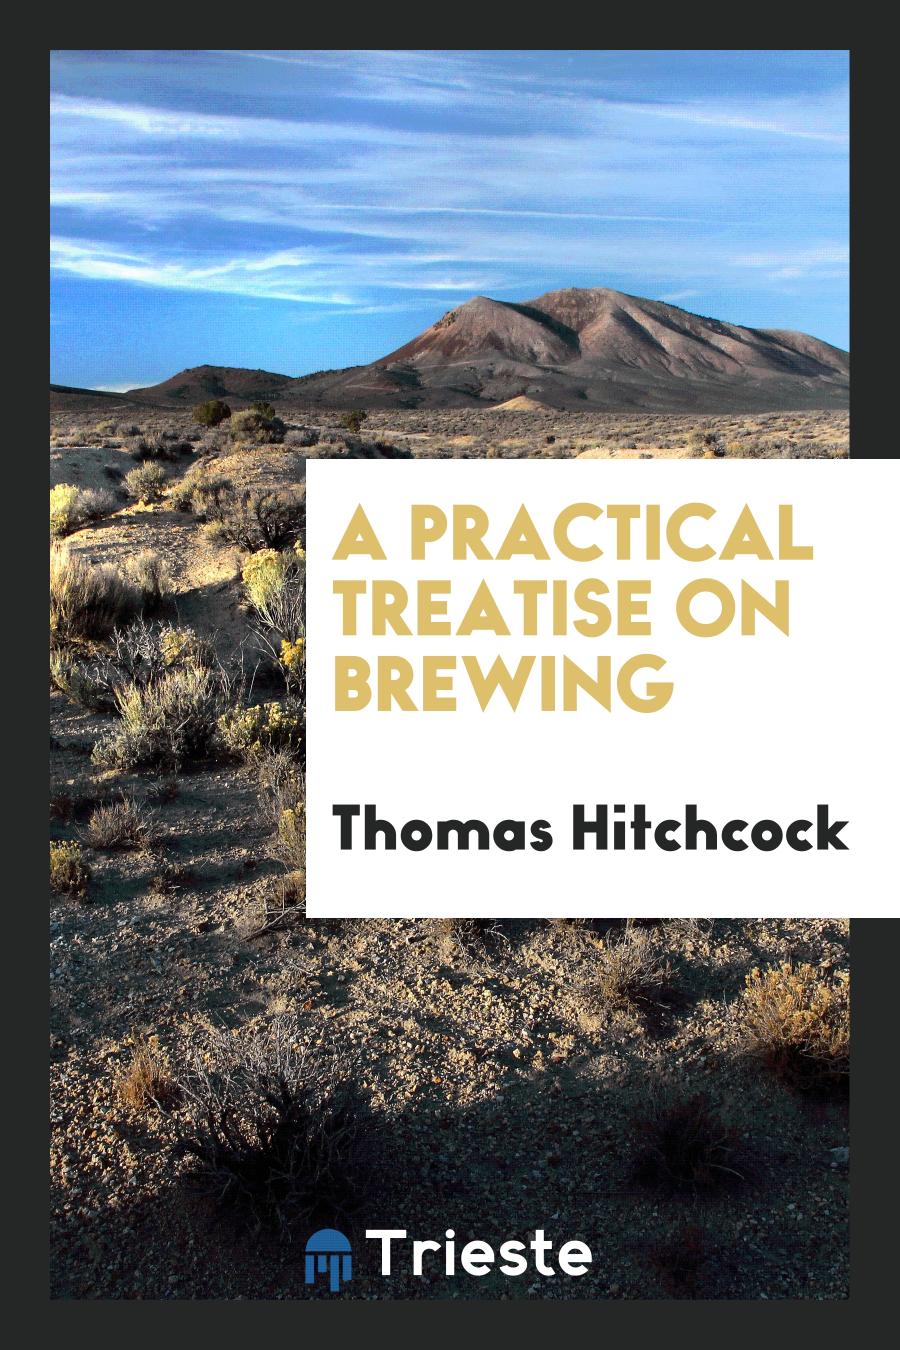 A practical treatise on brewing